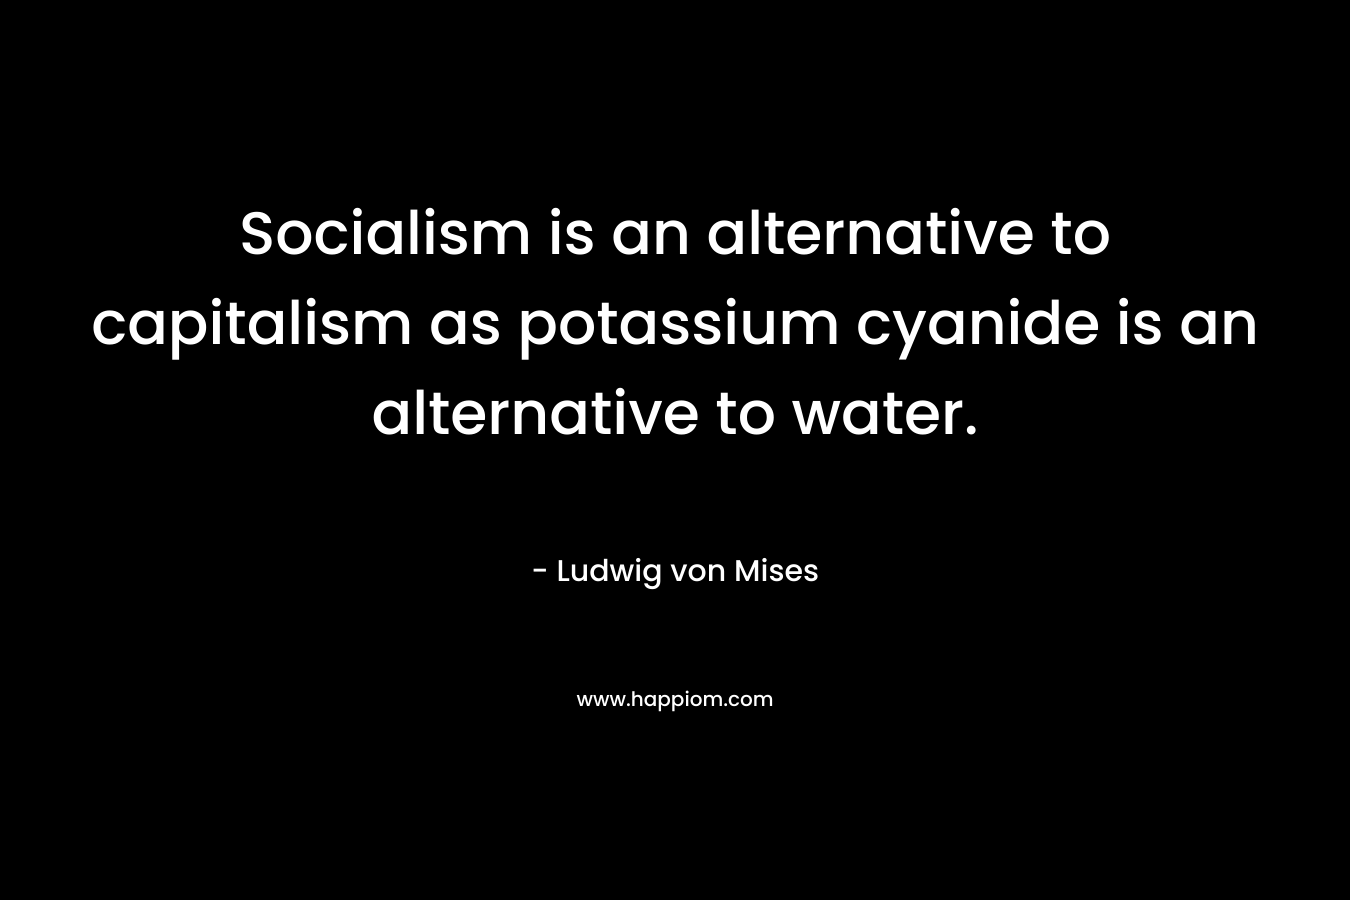 Socialism is an alternative to capitalism as potassium cyanide is an alternative to water. – Ludwig von Mises